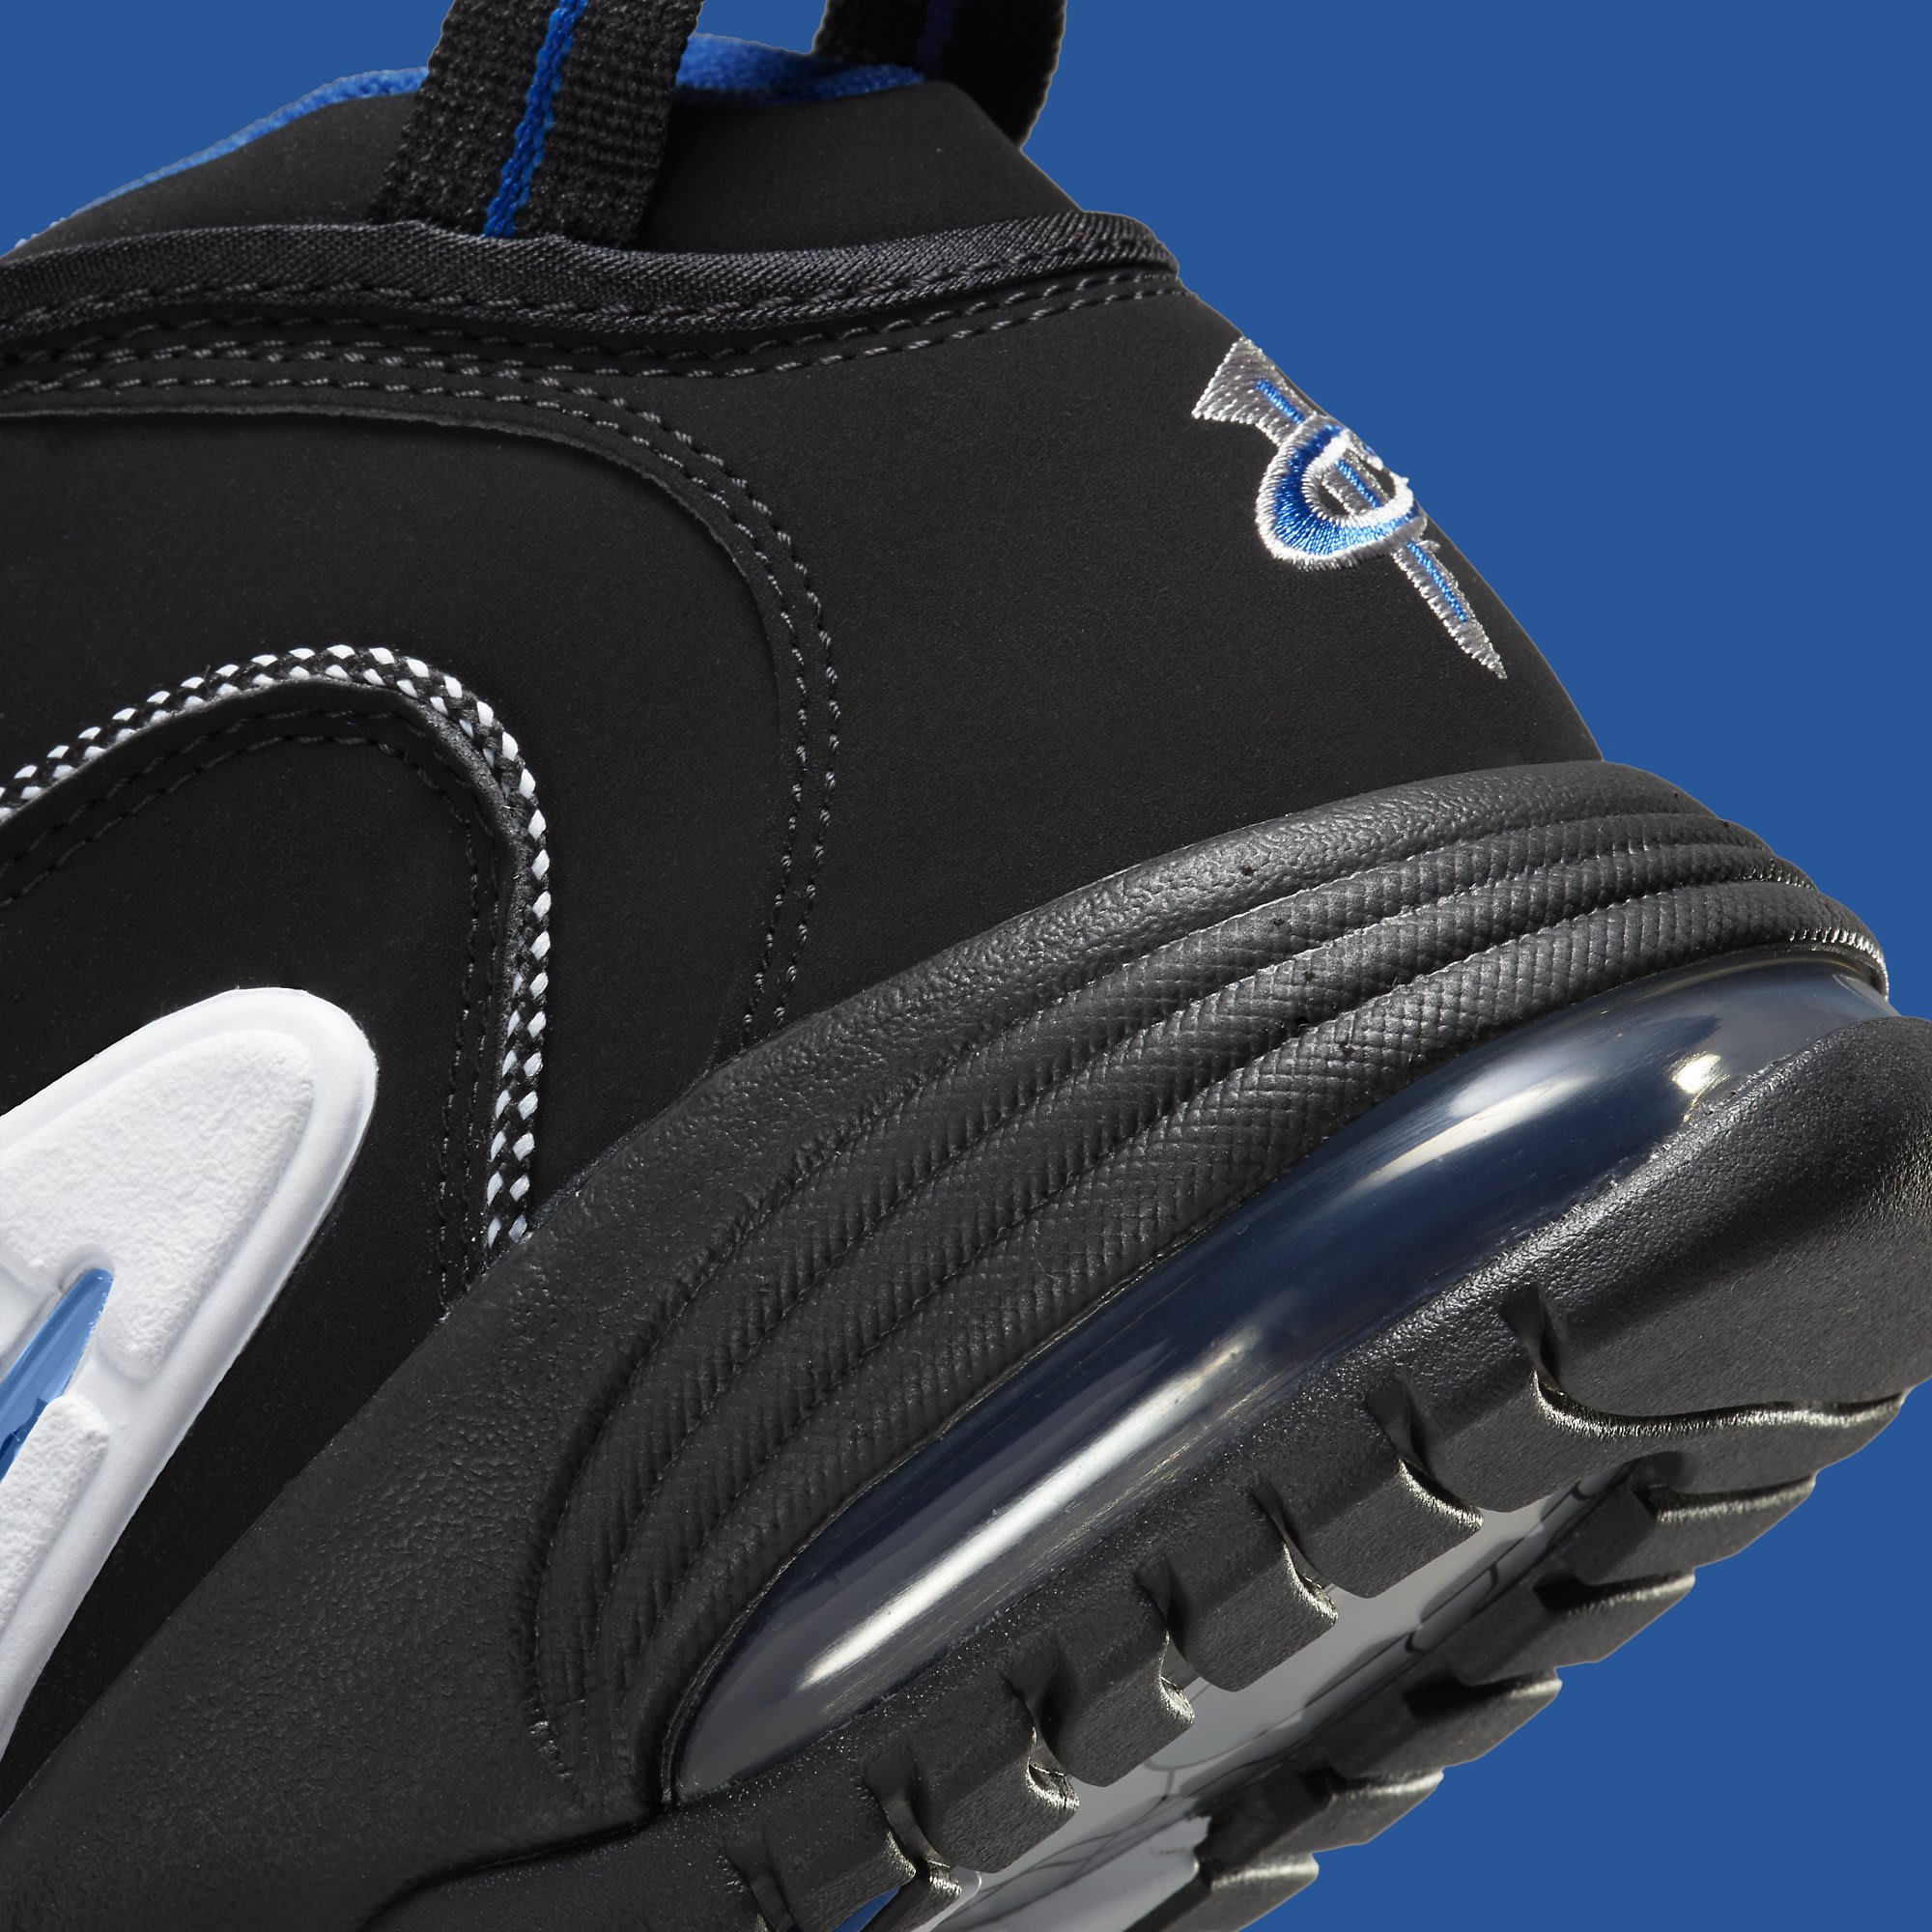 Nike Air Max Penny 1 Orlando Release Date Dn2487-001 Heel Detail